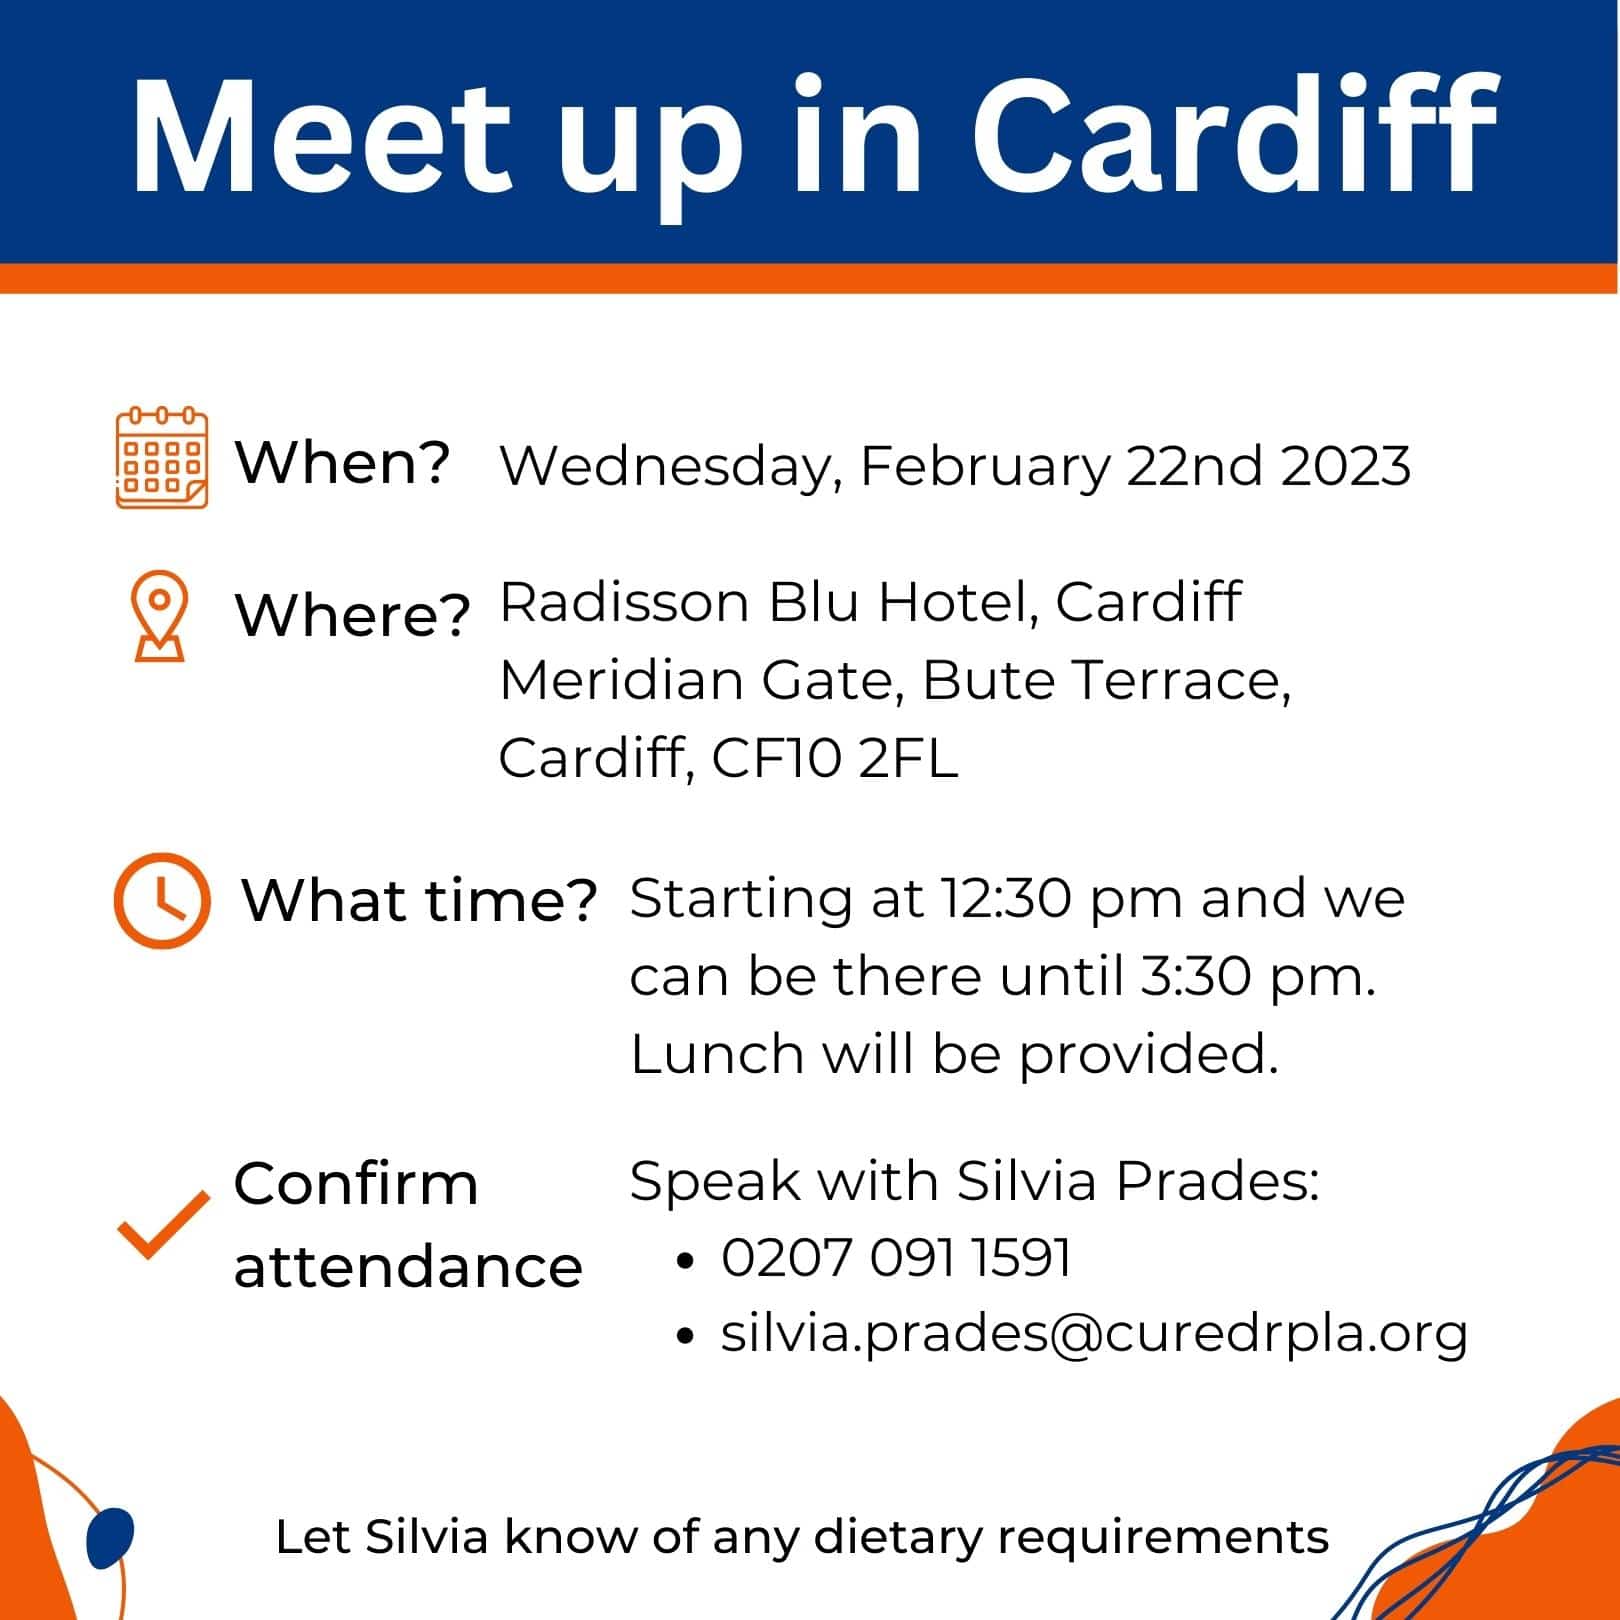 Meet up in Cardiff Flyer